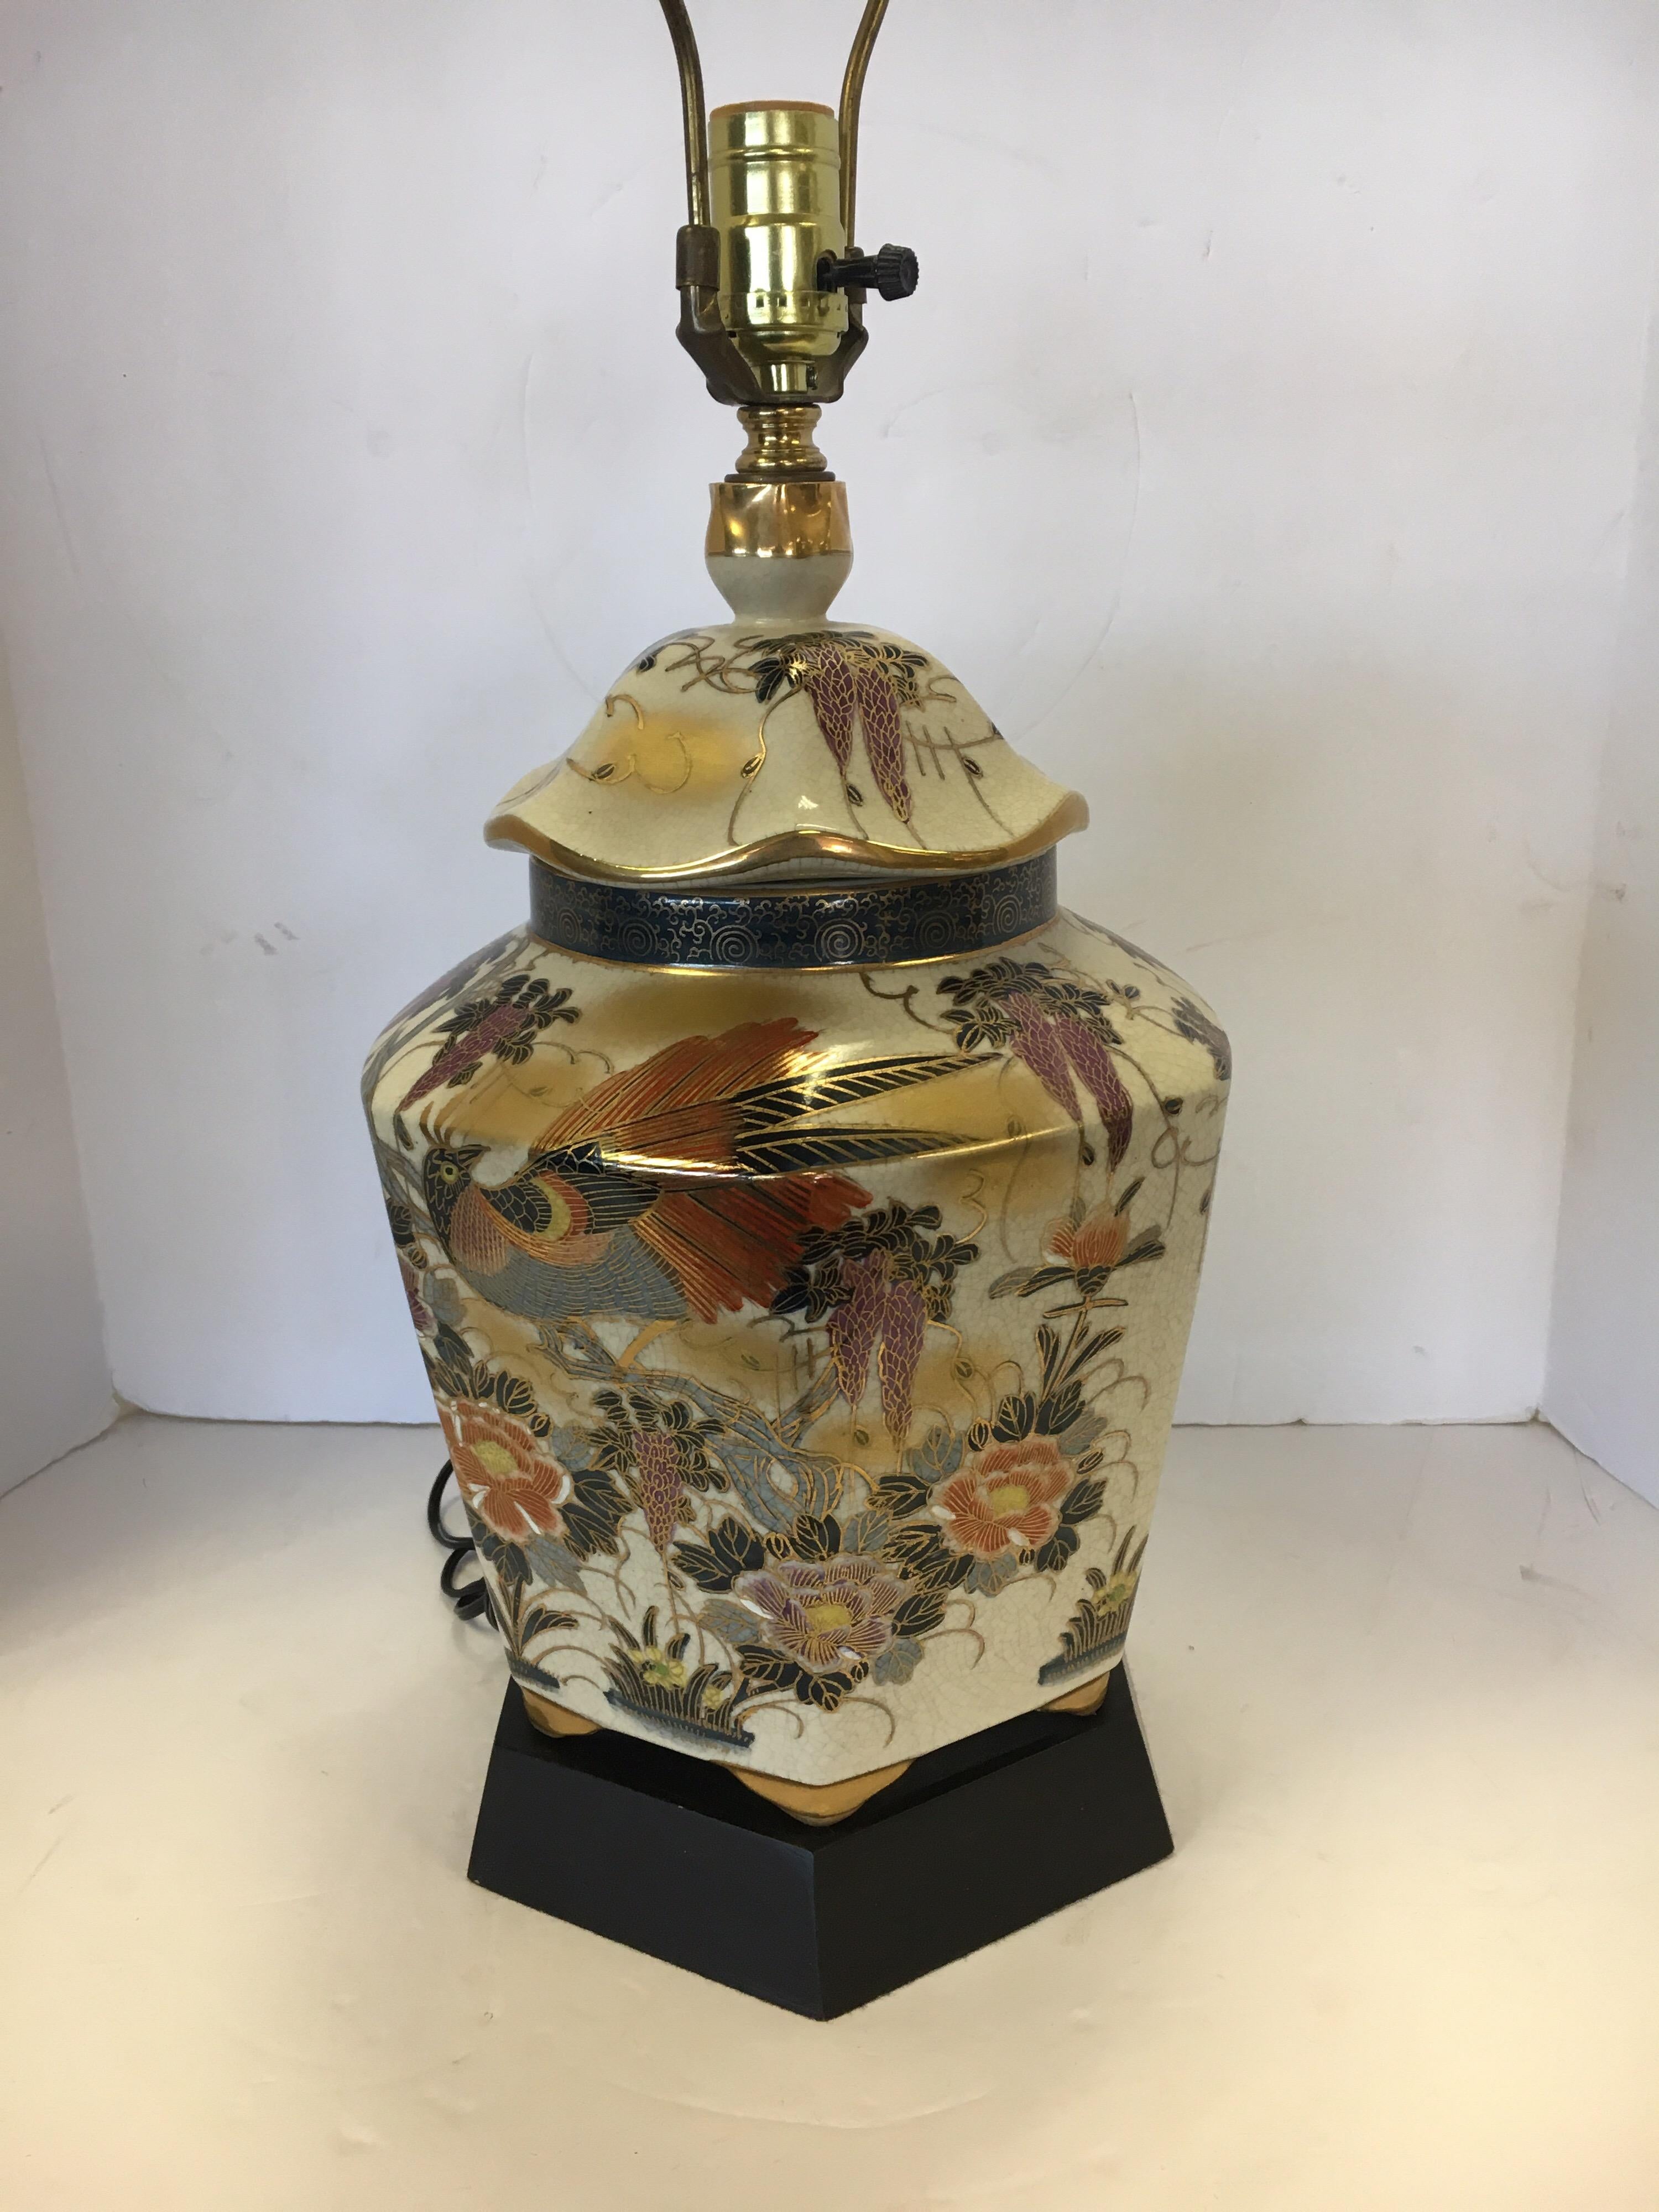 Gorgeous Asian inspired table lamp with vibrant colors throughout. Wired for USA and in perfect condition.